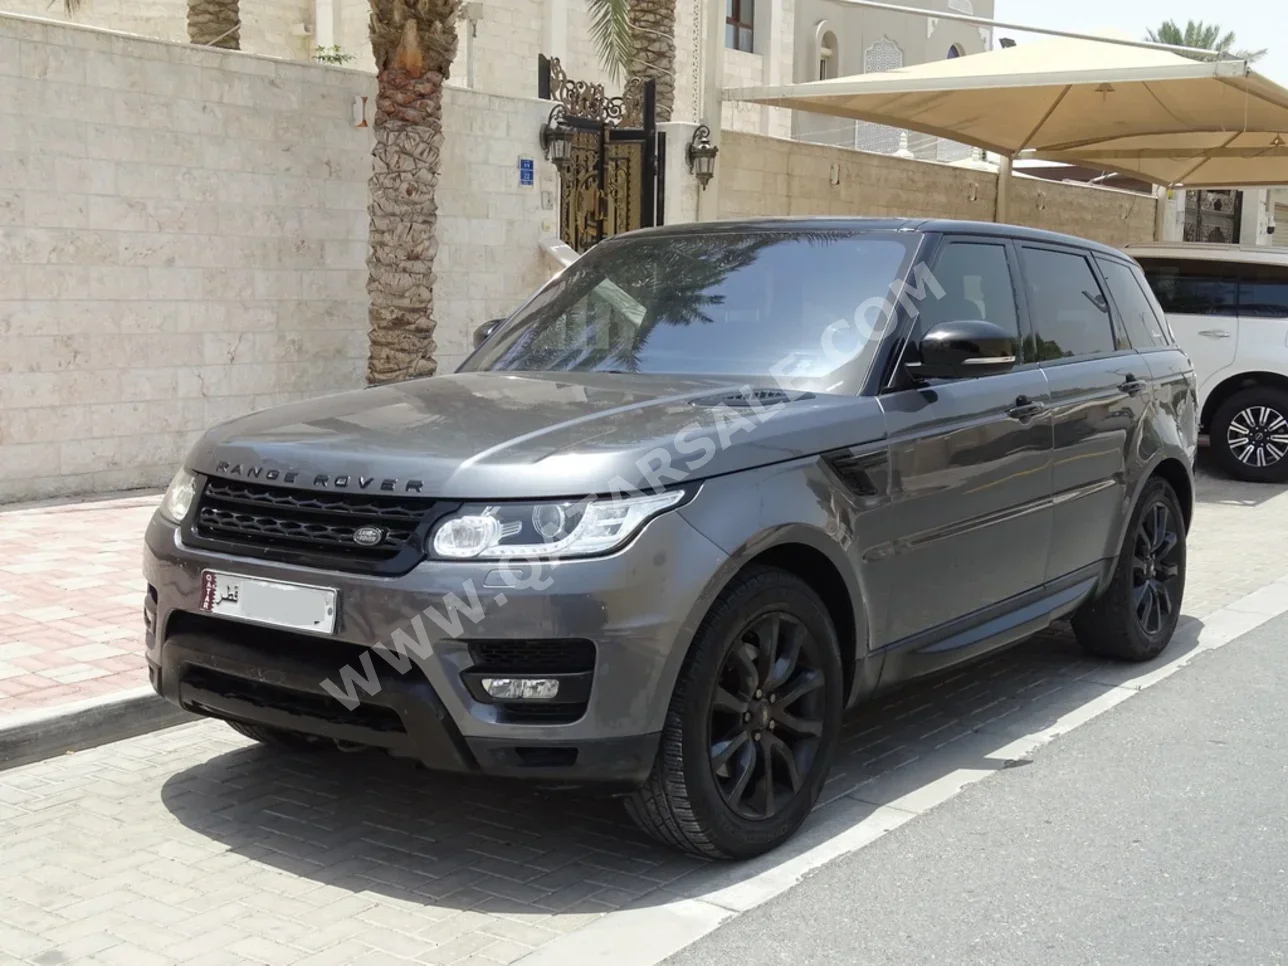 Land Rover  Range Rover  Sport HSE  2016  Automatic  125,000 Km  6 Cylinder  Four Wheel Drive (4WD)  SUV  Gray  With Warranty